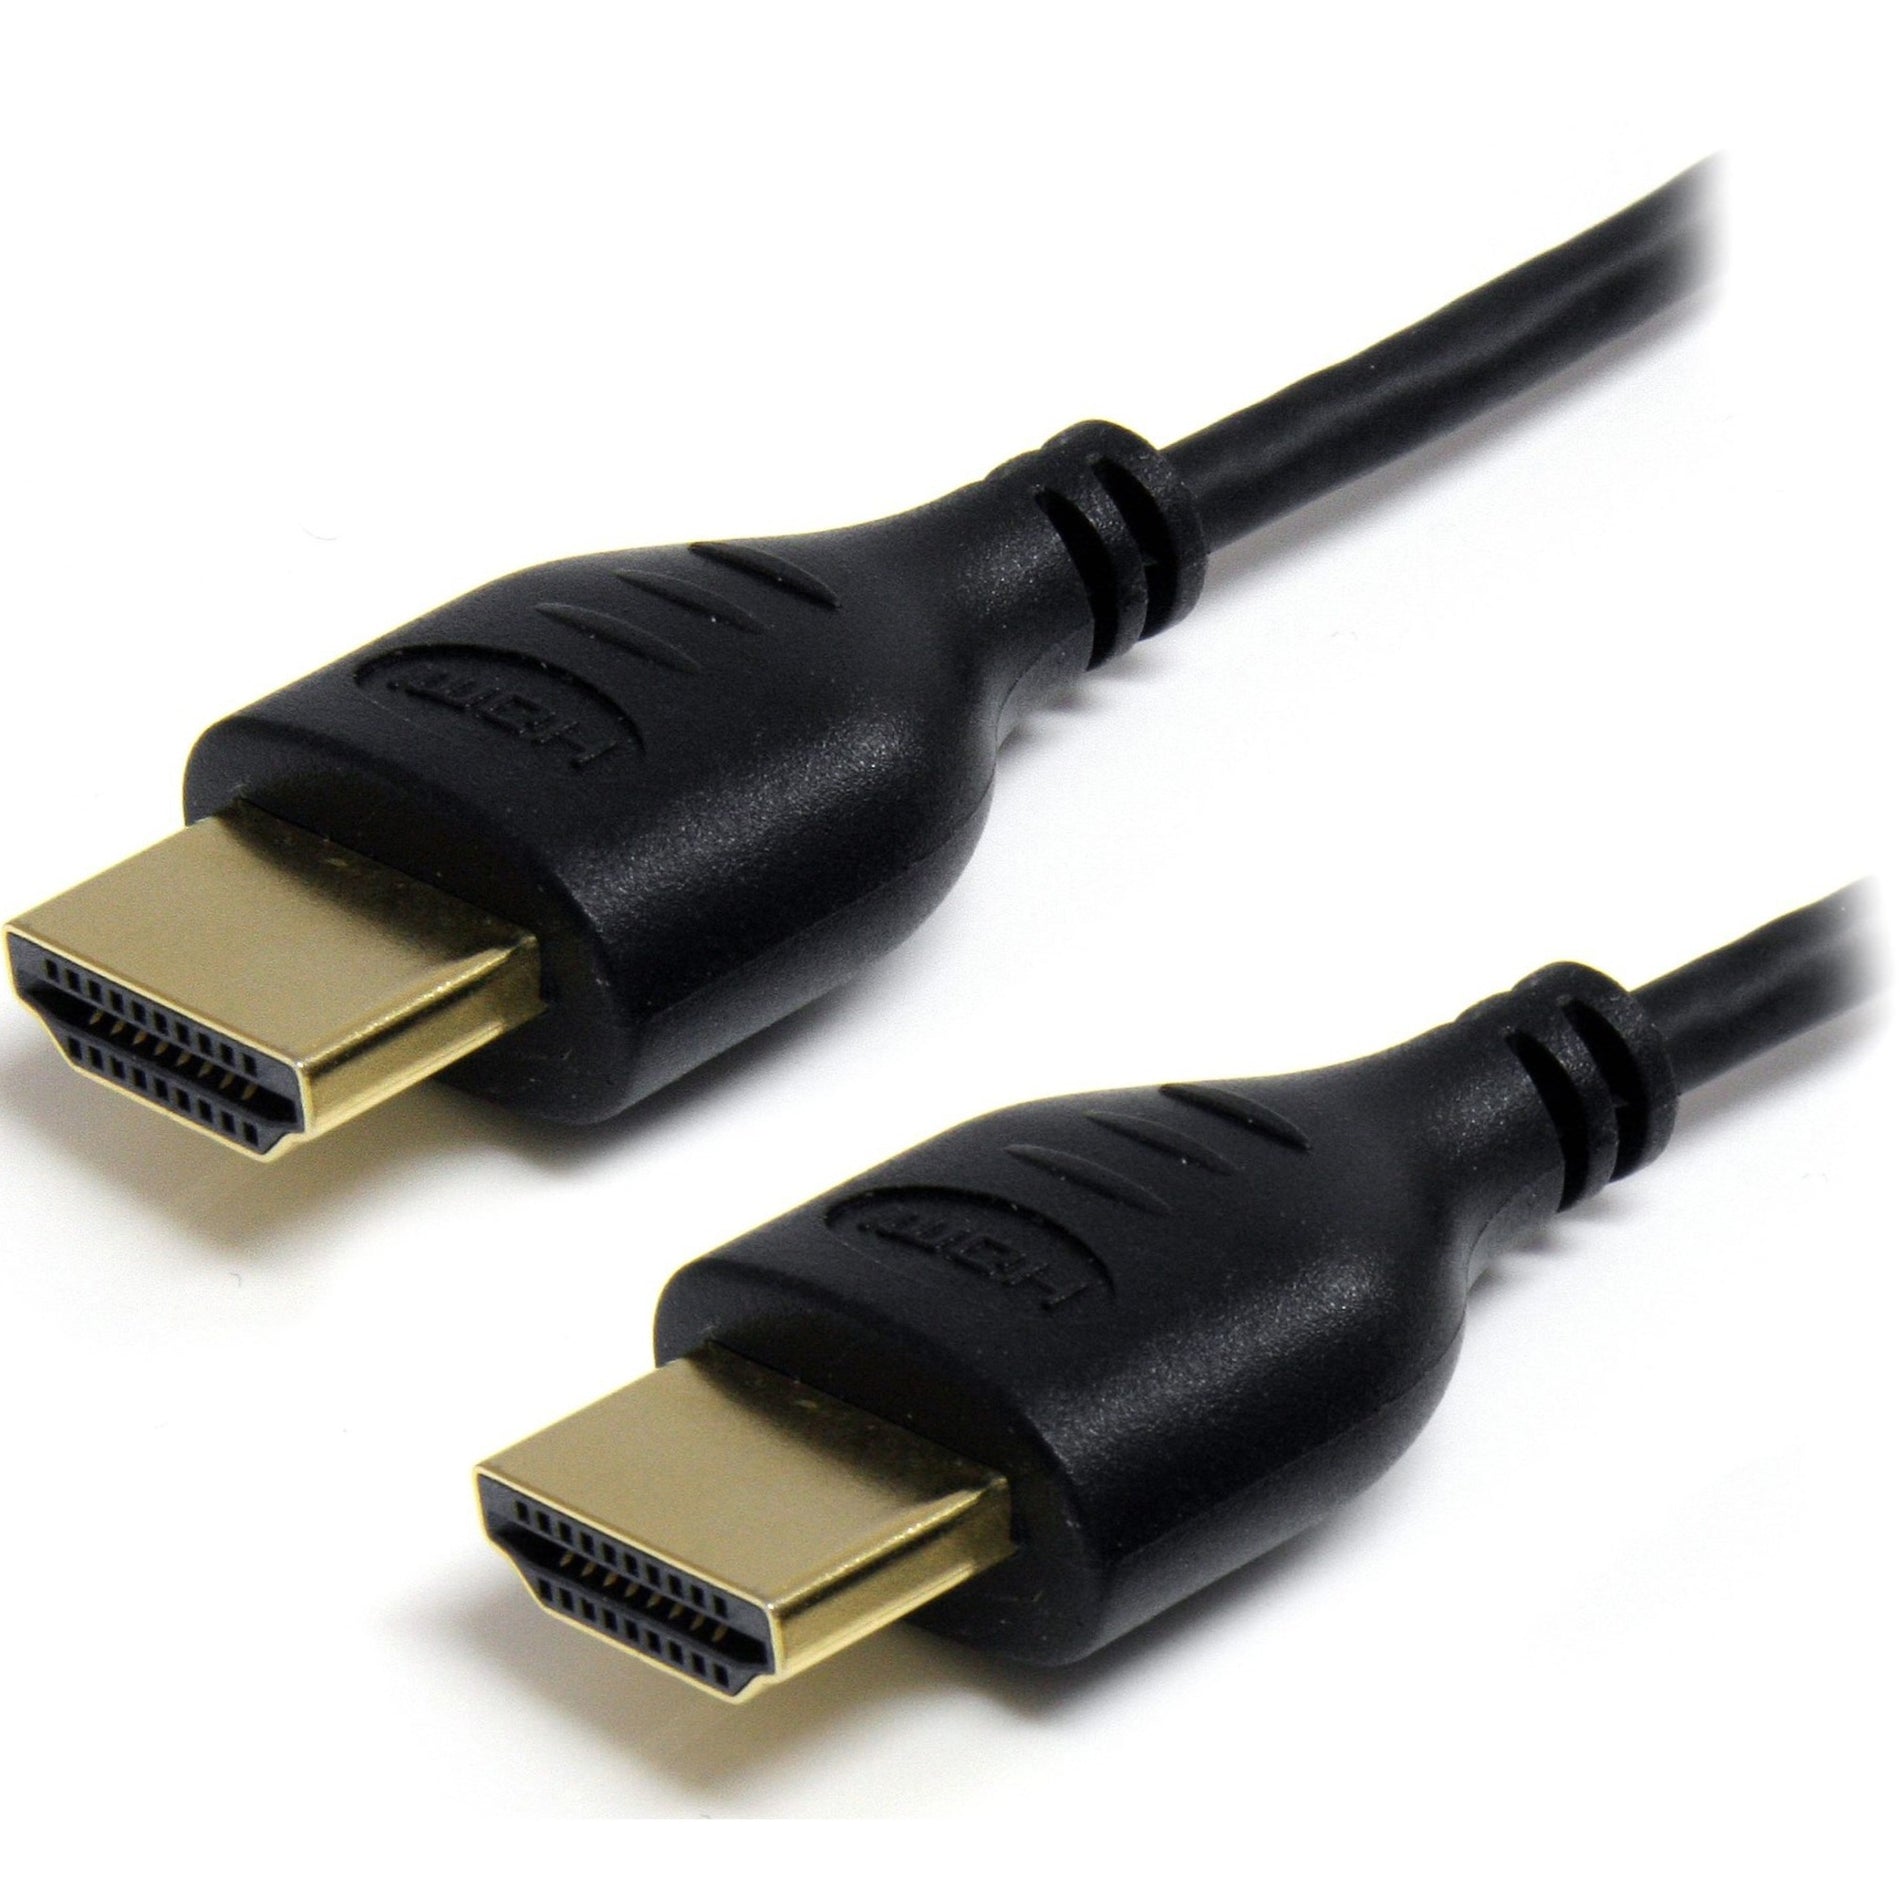 StarTech.com HDMIMM6HSS 6 ft High Speed Slim HDMI Digital Video Cable with Ethernet, Corrosion Resistant, Flexible, 4096 x 2160 Supported Resolution